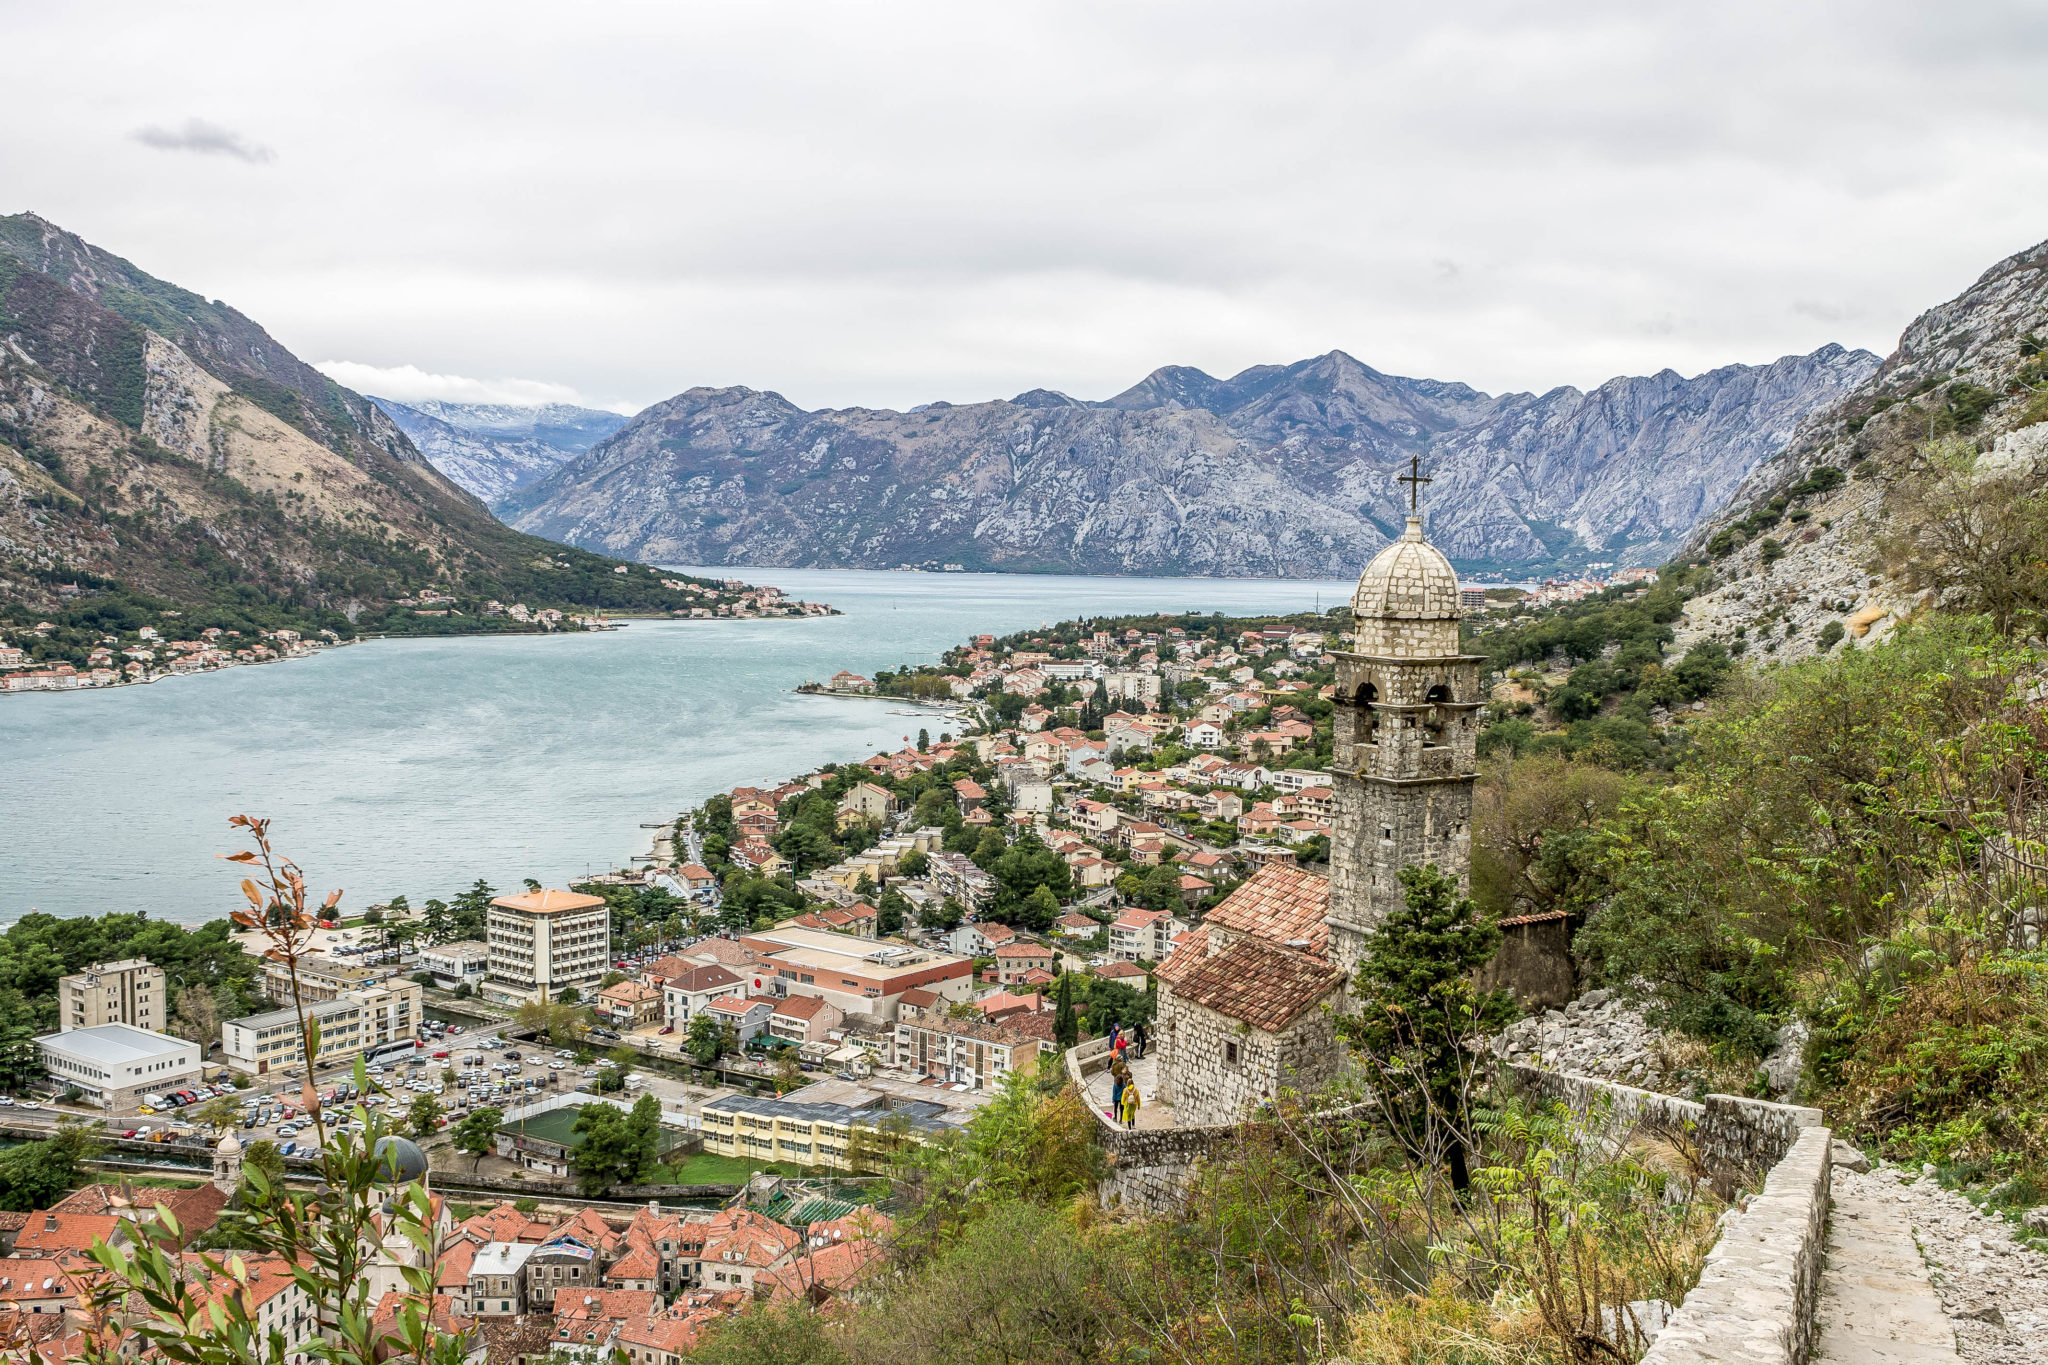 One of the top things to do in Kotor is to hike to the fortress above the town. This offers up great views of Kotor and Kotor Bay. This is one of the best things to do in Montenegro and is the perfect day trip from Dubrovnik.